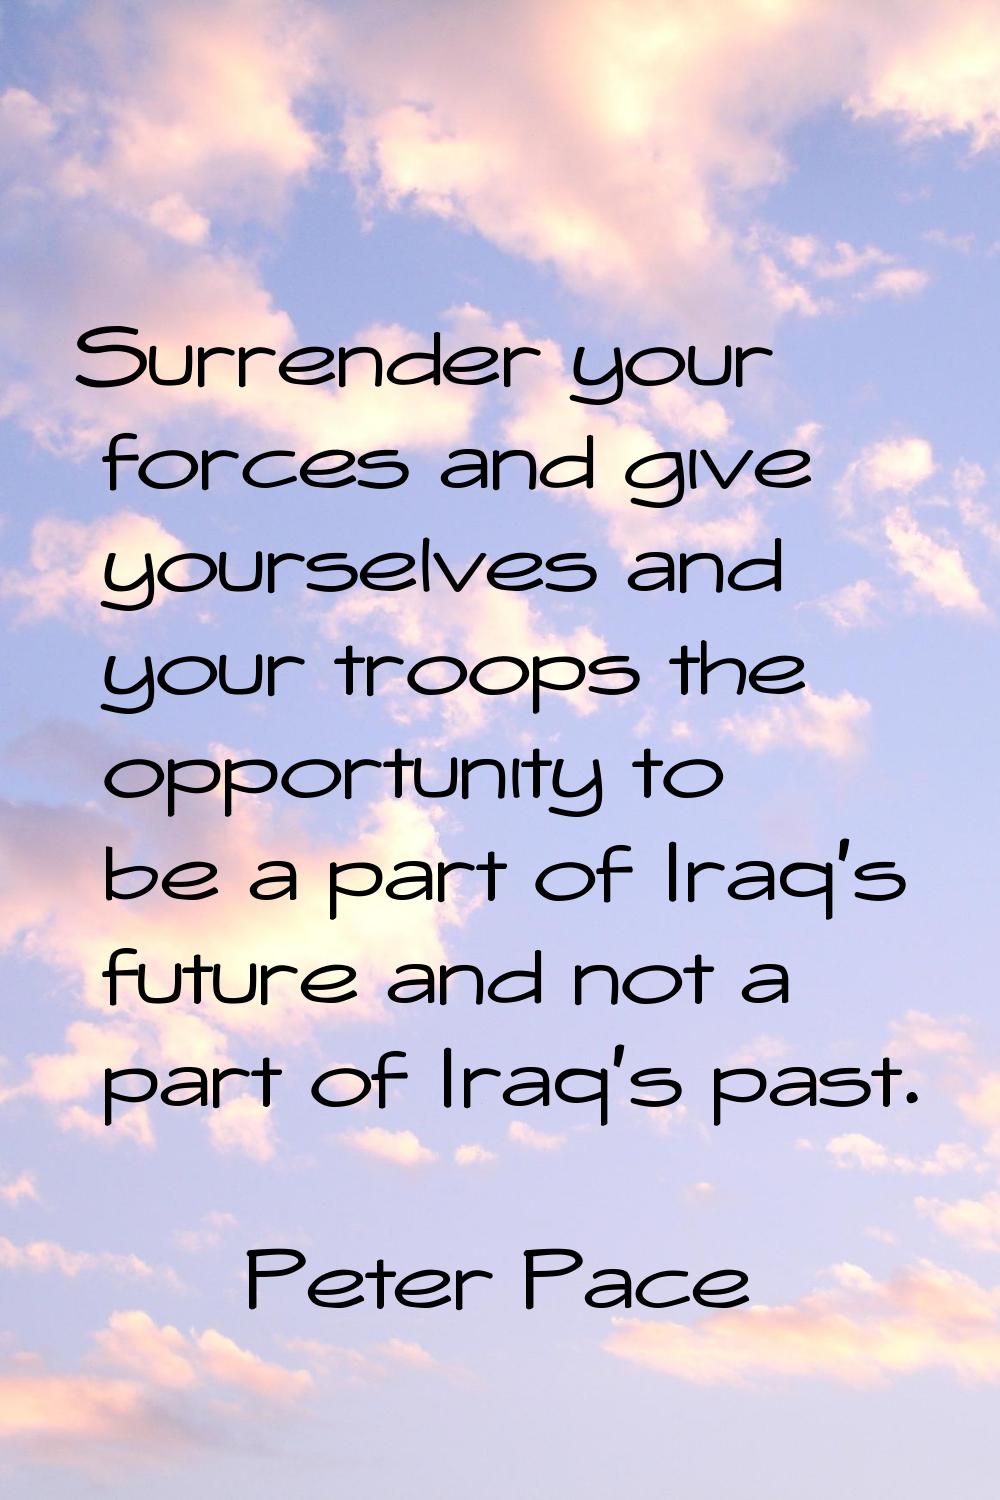 Surrender your forces and give yourselves and your troops the opportunity to be a part of Iraq's fu